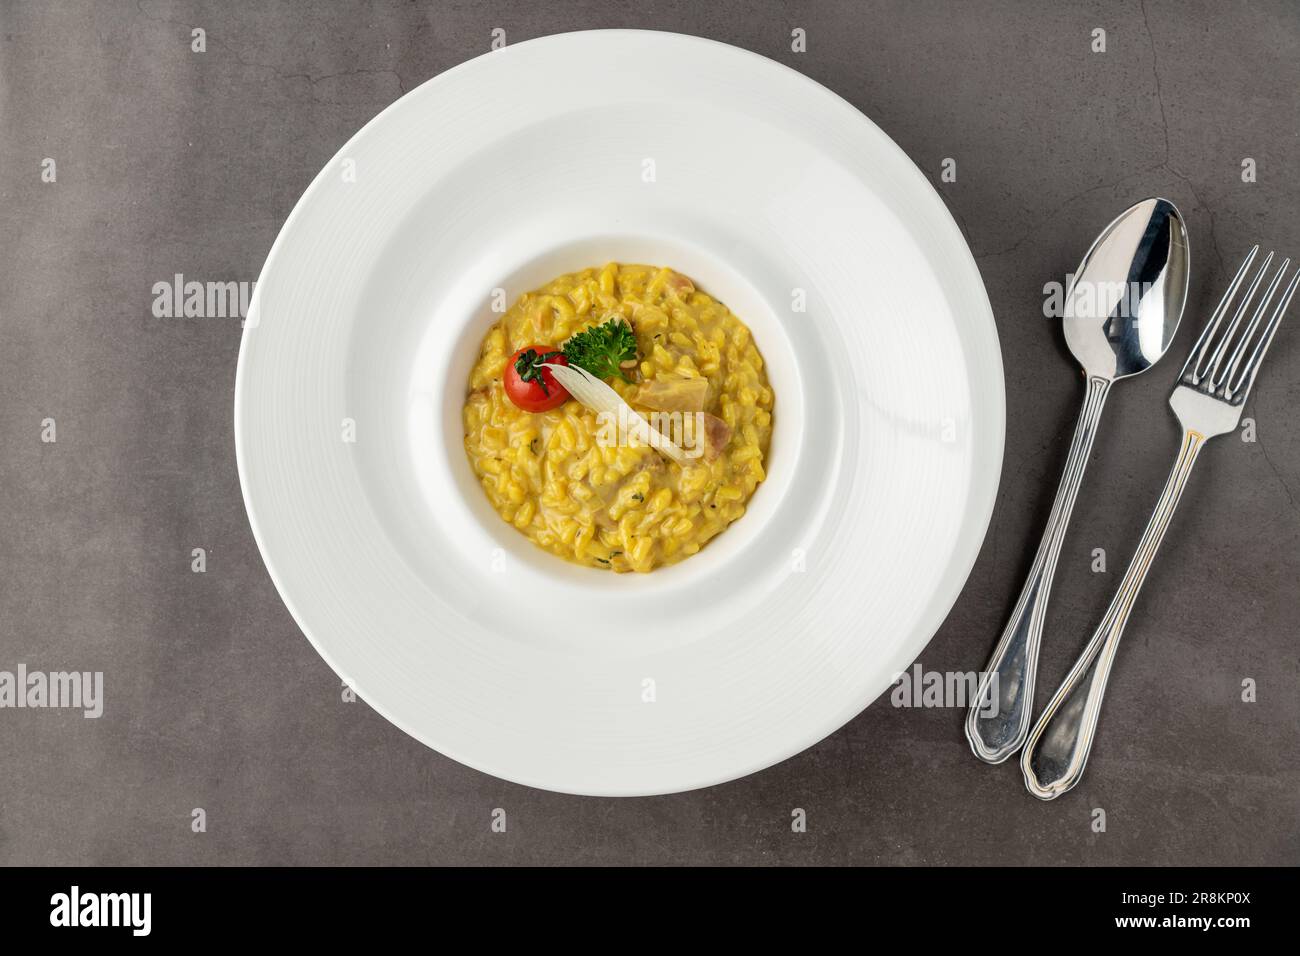 Parmesan cheese risotto on a white porcelain plate Stock Photo